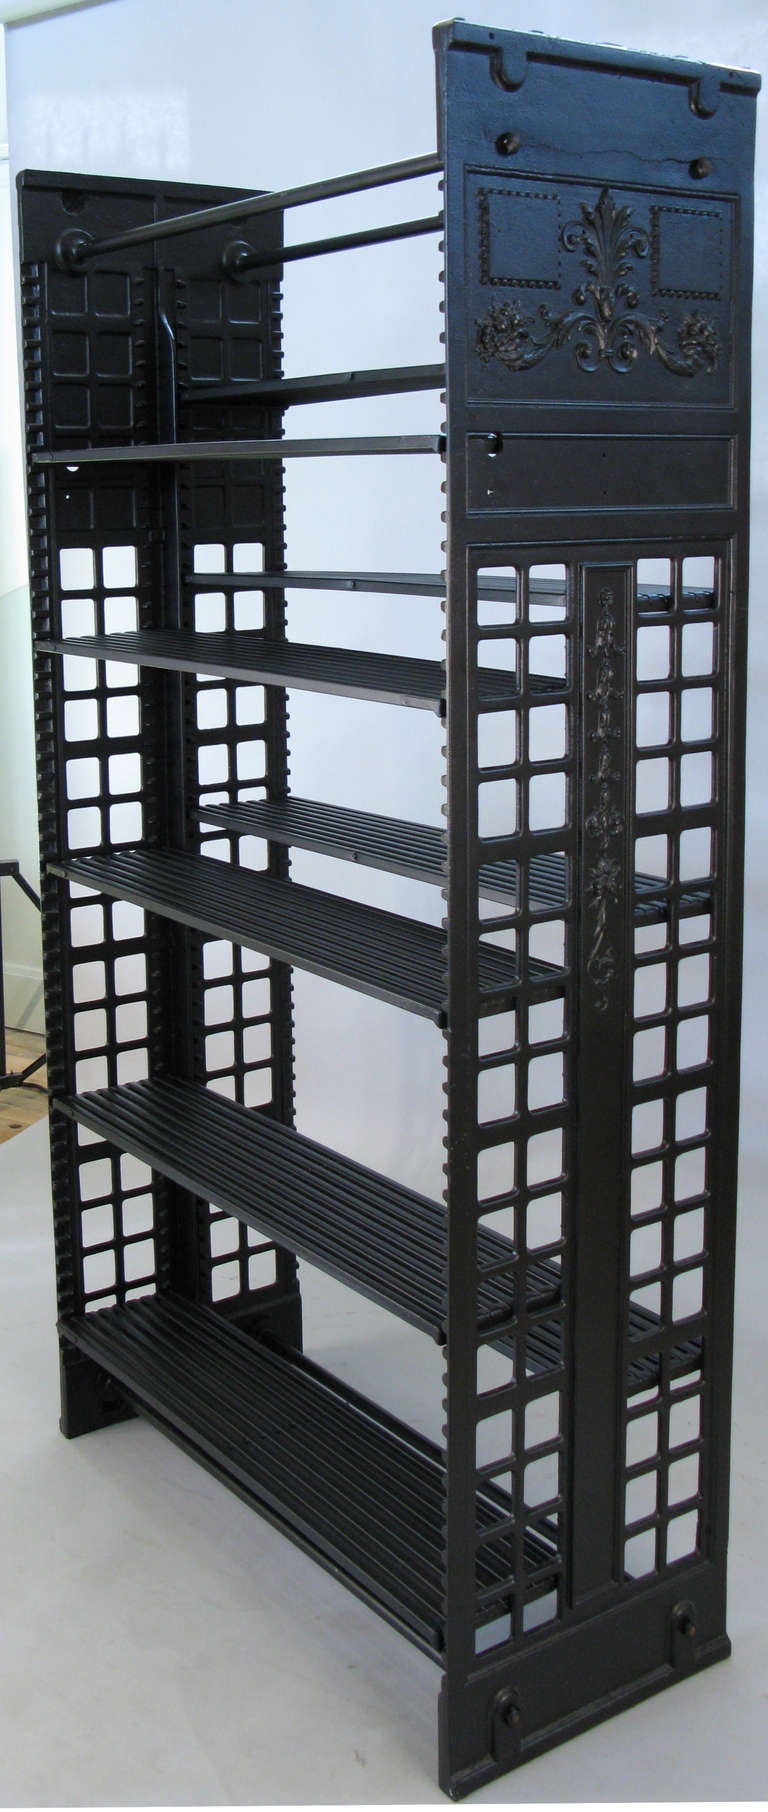 an antique archival library bookcase in cast iron by Snead & Company. beautiful design, powder coated in black. these impressive cast iron bookcases with adjustable steel shelves were the standard in the late 19th and early 20th century for library